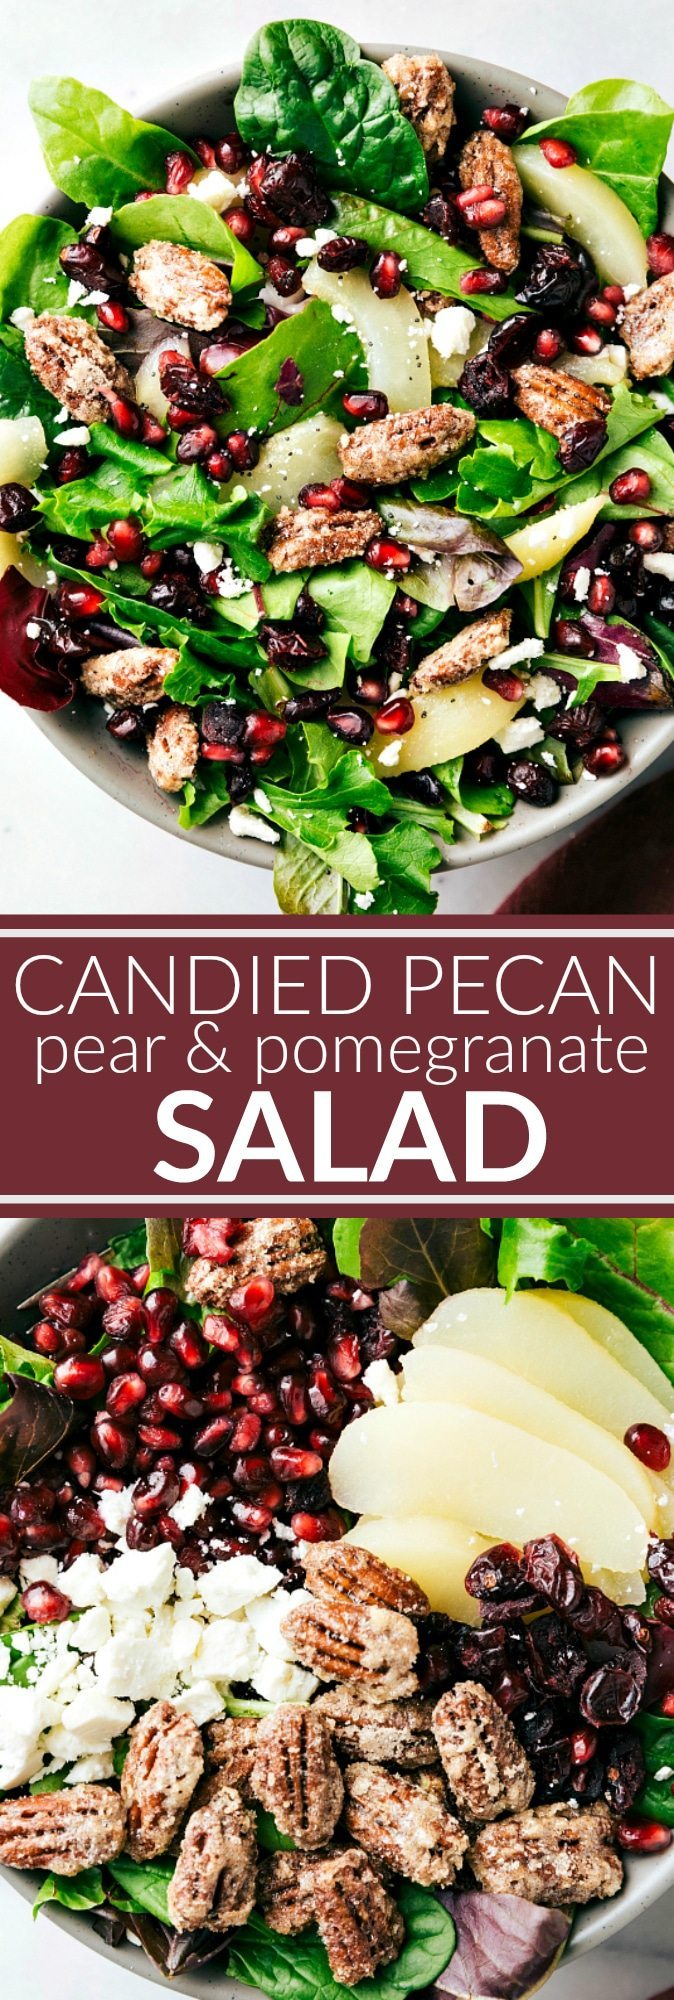 BEST HOLIDAY SALAD! An easy to make and delicious side salad -- candied pecans, pears, pomegranates, dried cranberries, and feta cheese with a simple incredible raspberry poppyseed dressing. via chelseasmessyapron.com